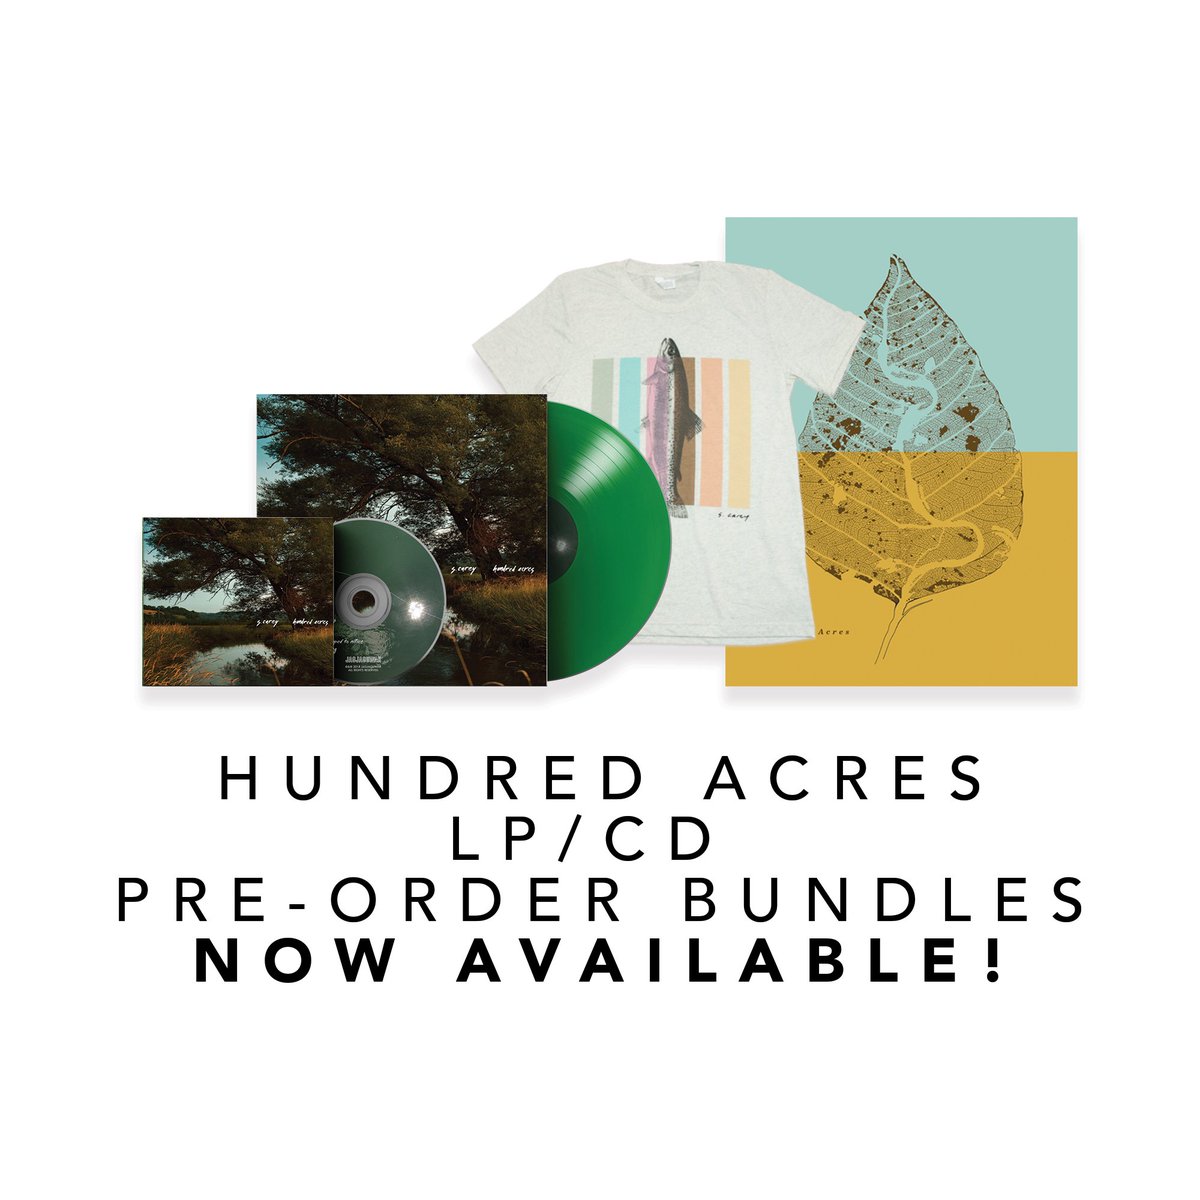 S Carey Pre Order Hundred Acres Bundles Choose From Either The Cd And Lp Plus Get A Brand New Poster And The Orig Trout Tee H E R E T Co Efvdwfskns